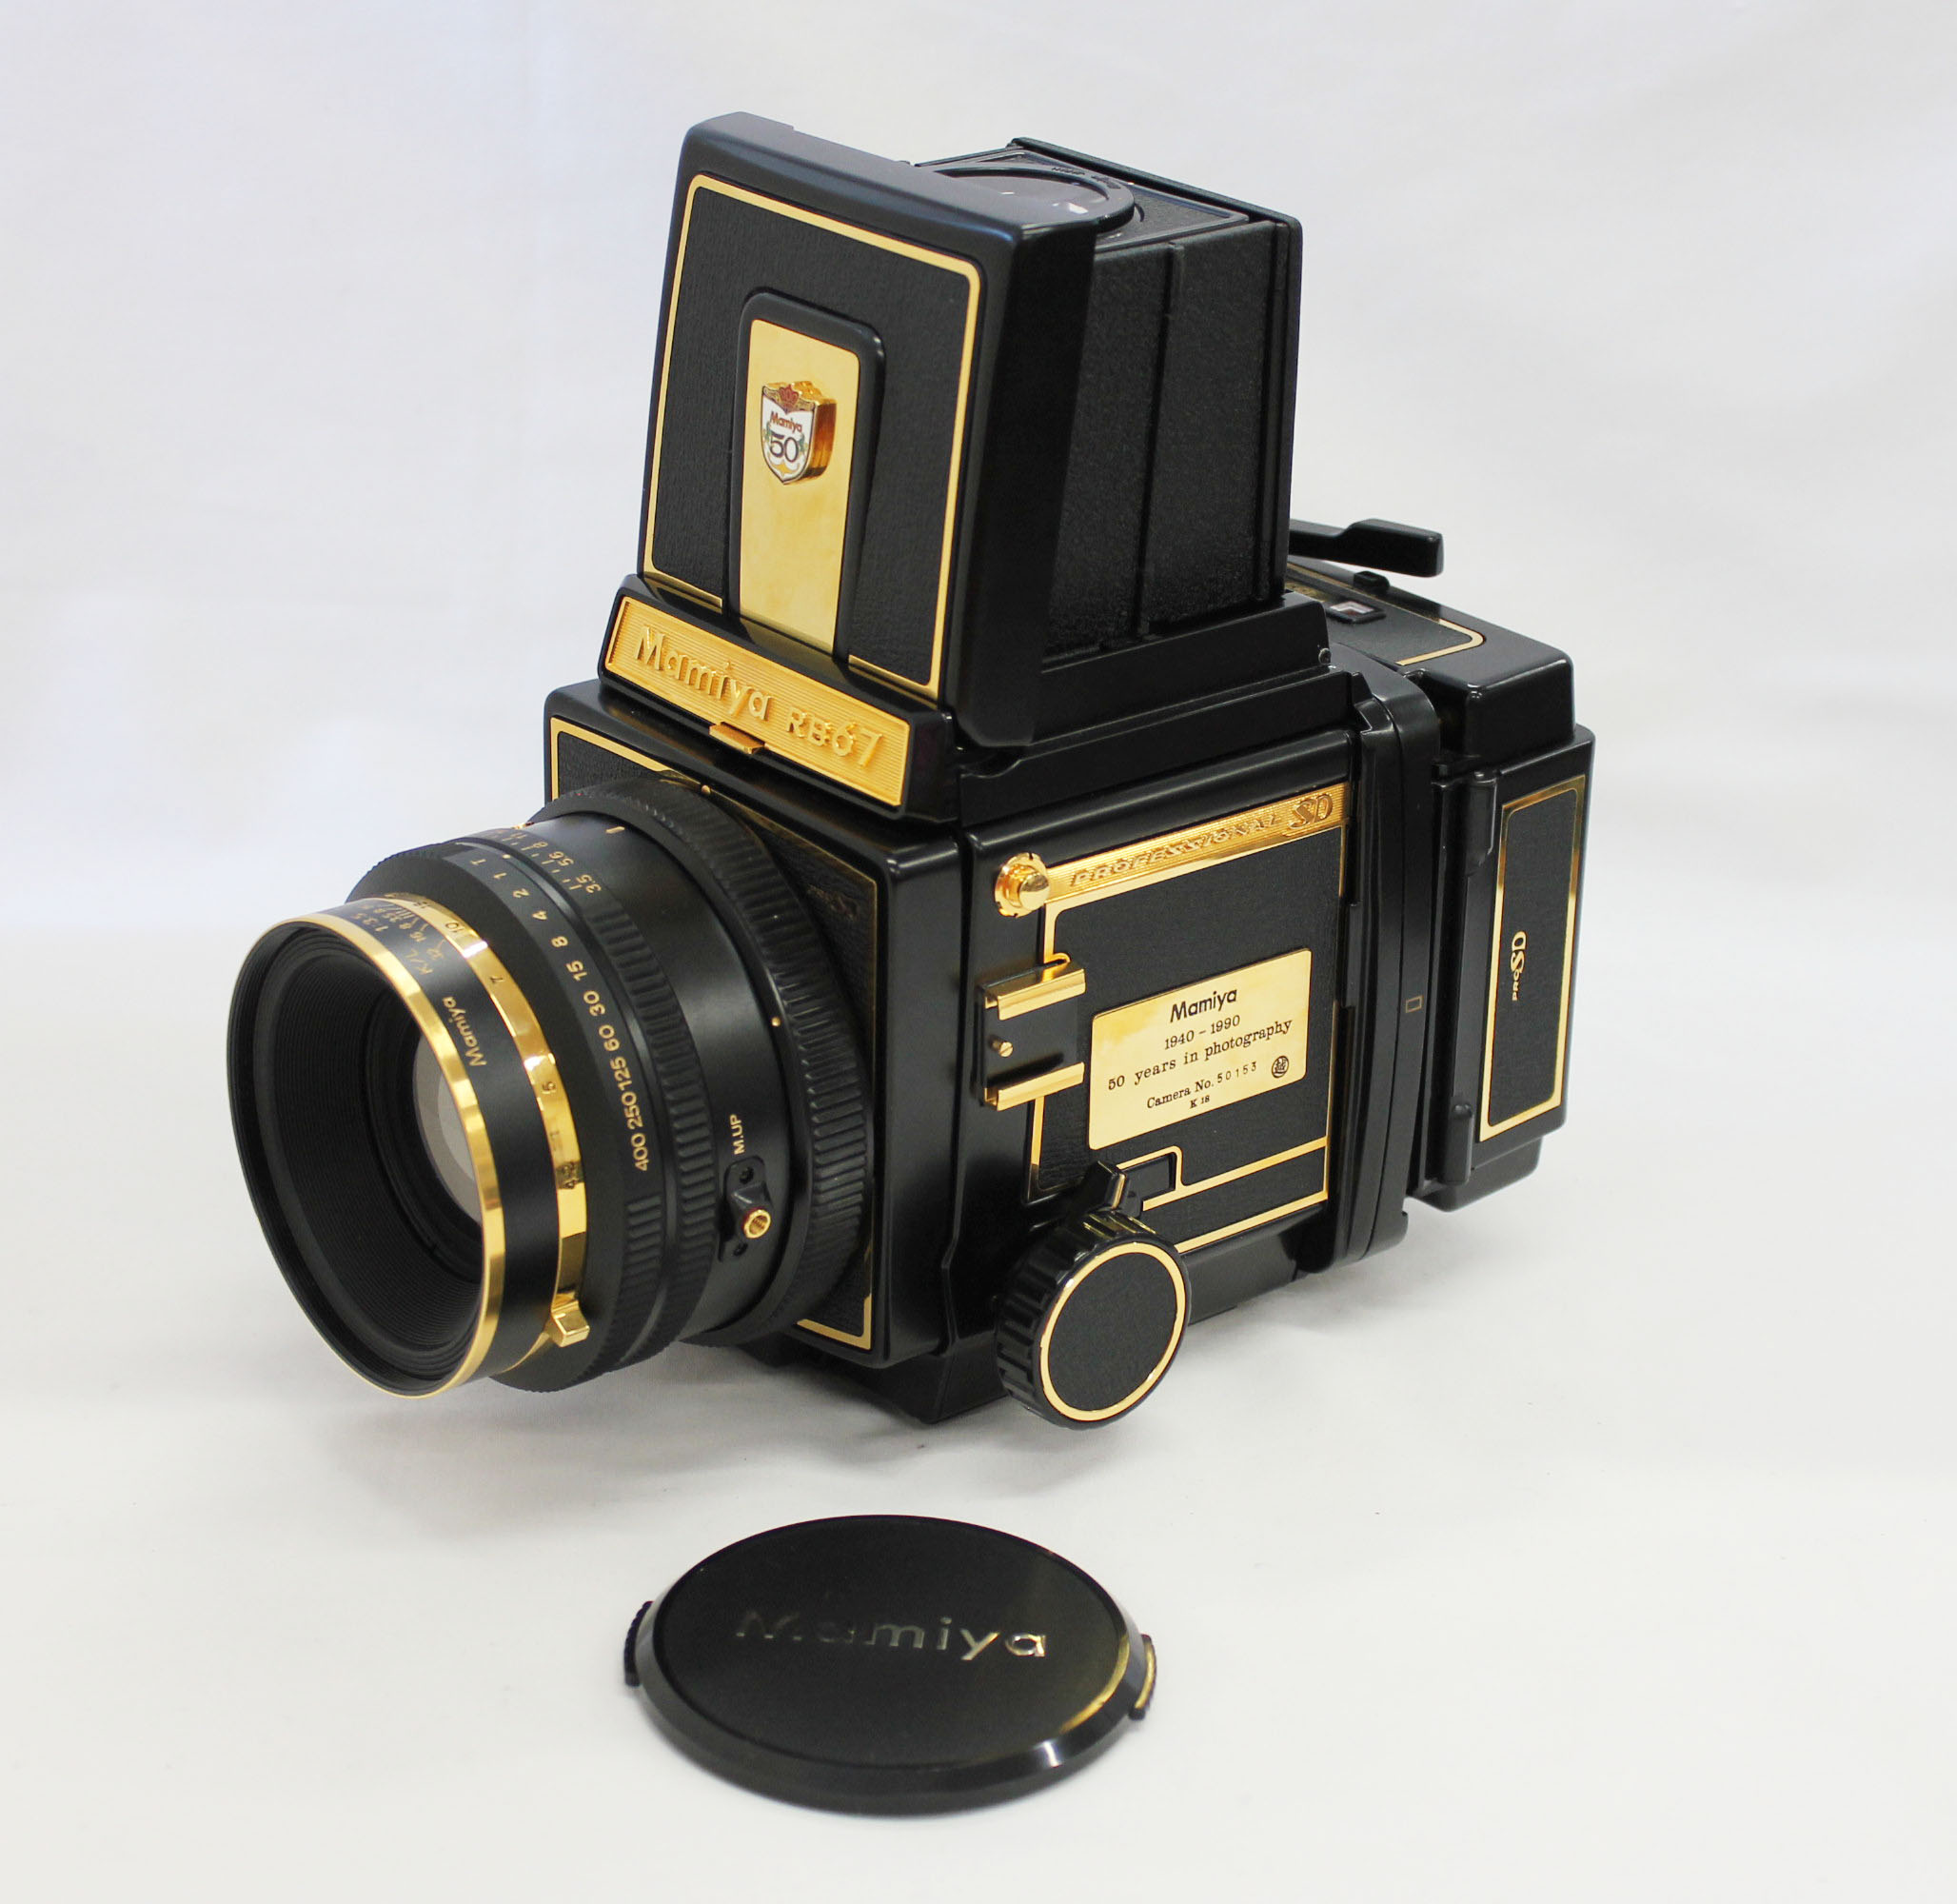 Mamiya RB67 Pro SD Gold K/L 127mm F/3.5 50 Years Limited Edition of 300 from Japan Photo 1